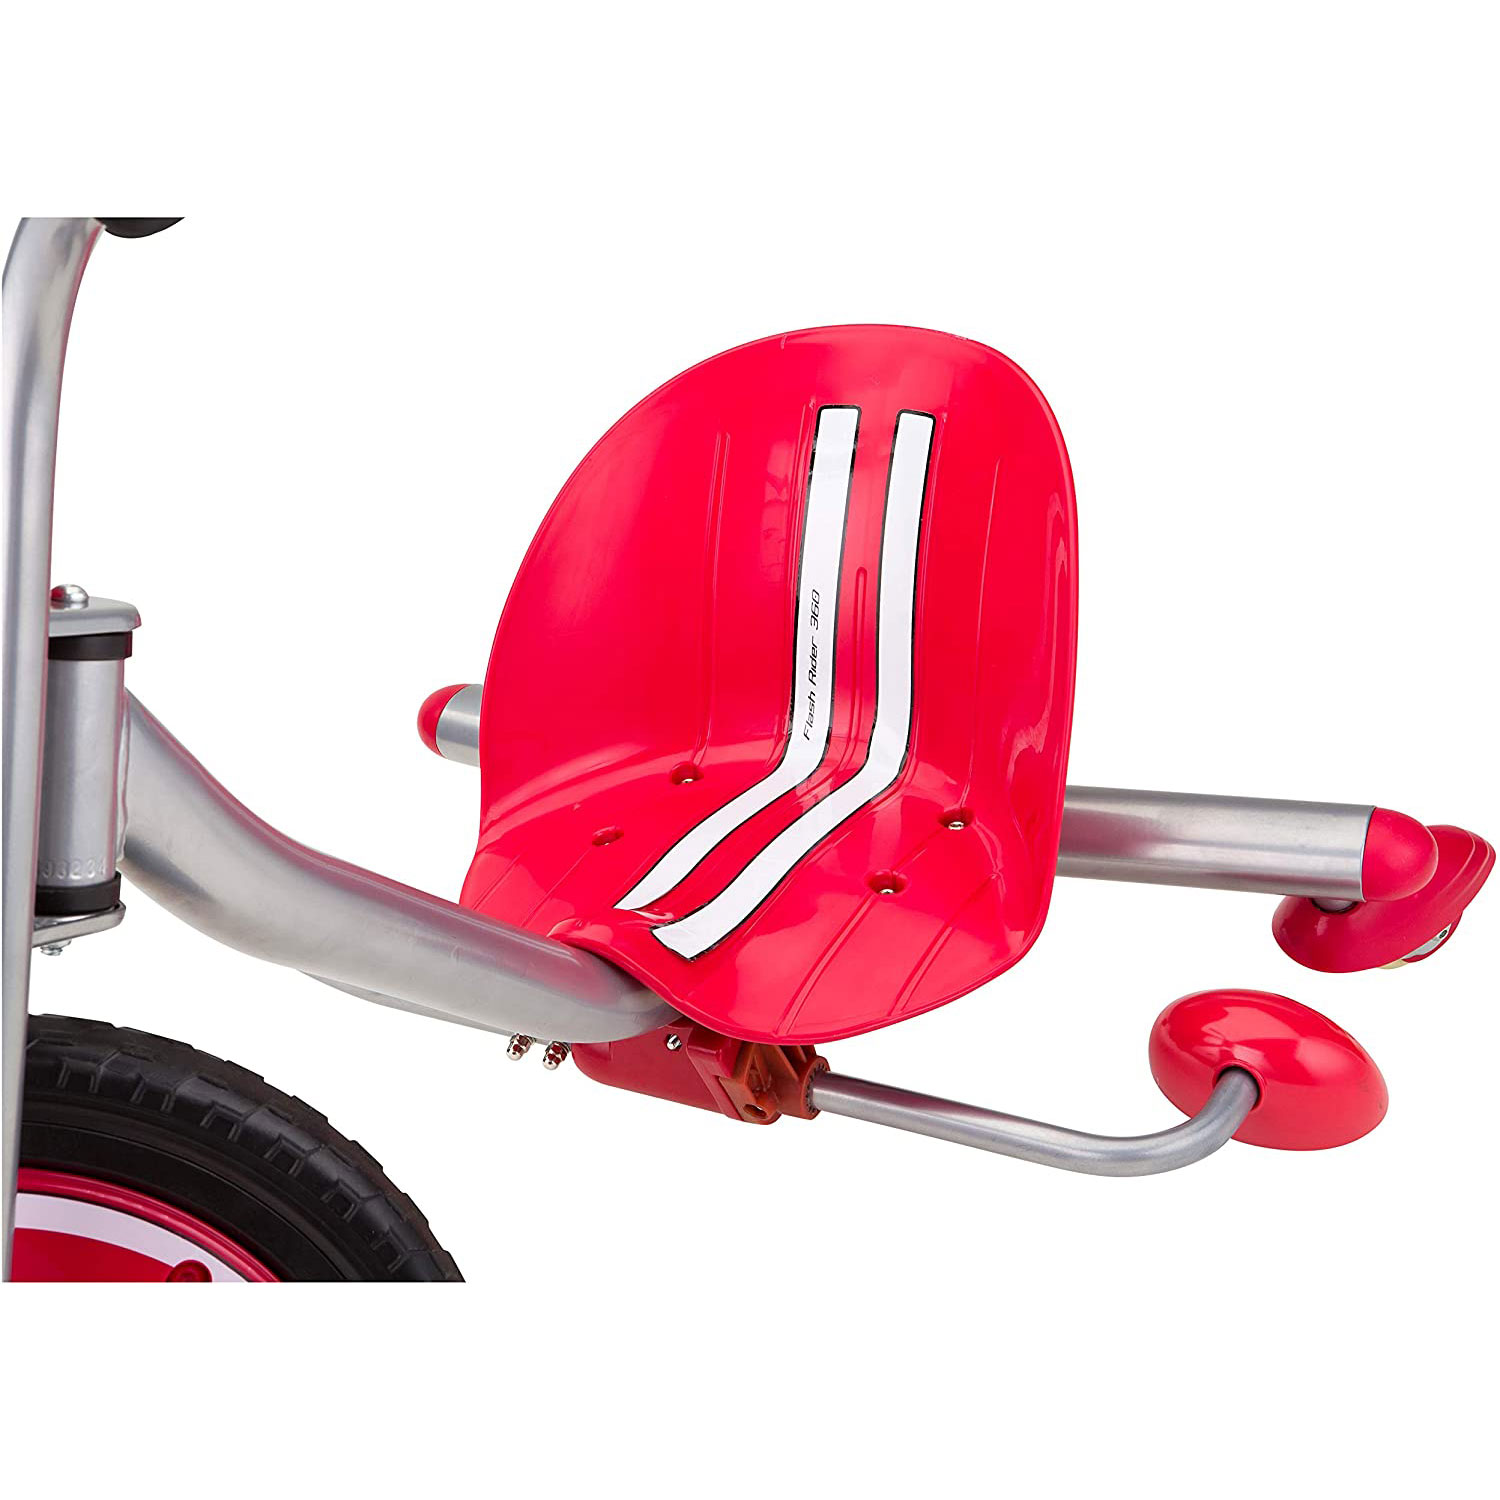 Razor FlashRider 360 Tricycle with Sparks - Red, 16" Front Wheel, Ride-On Trike Toy for Kids Ages 6+ - image 5 of 6